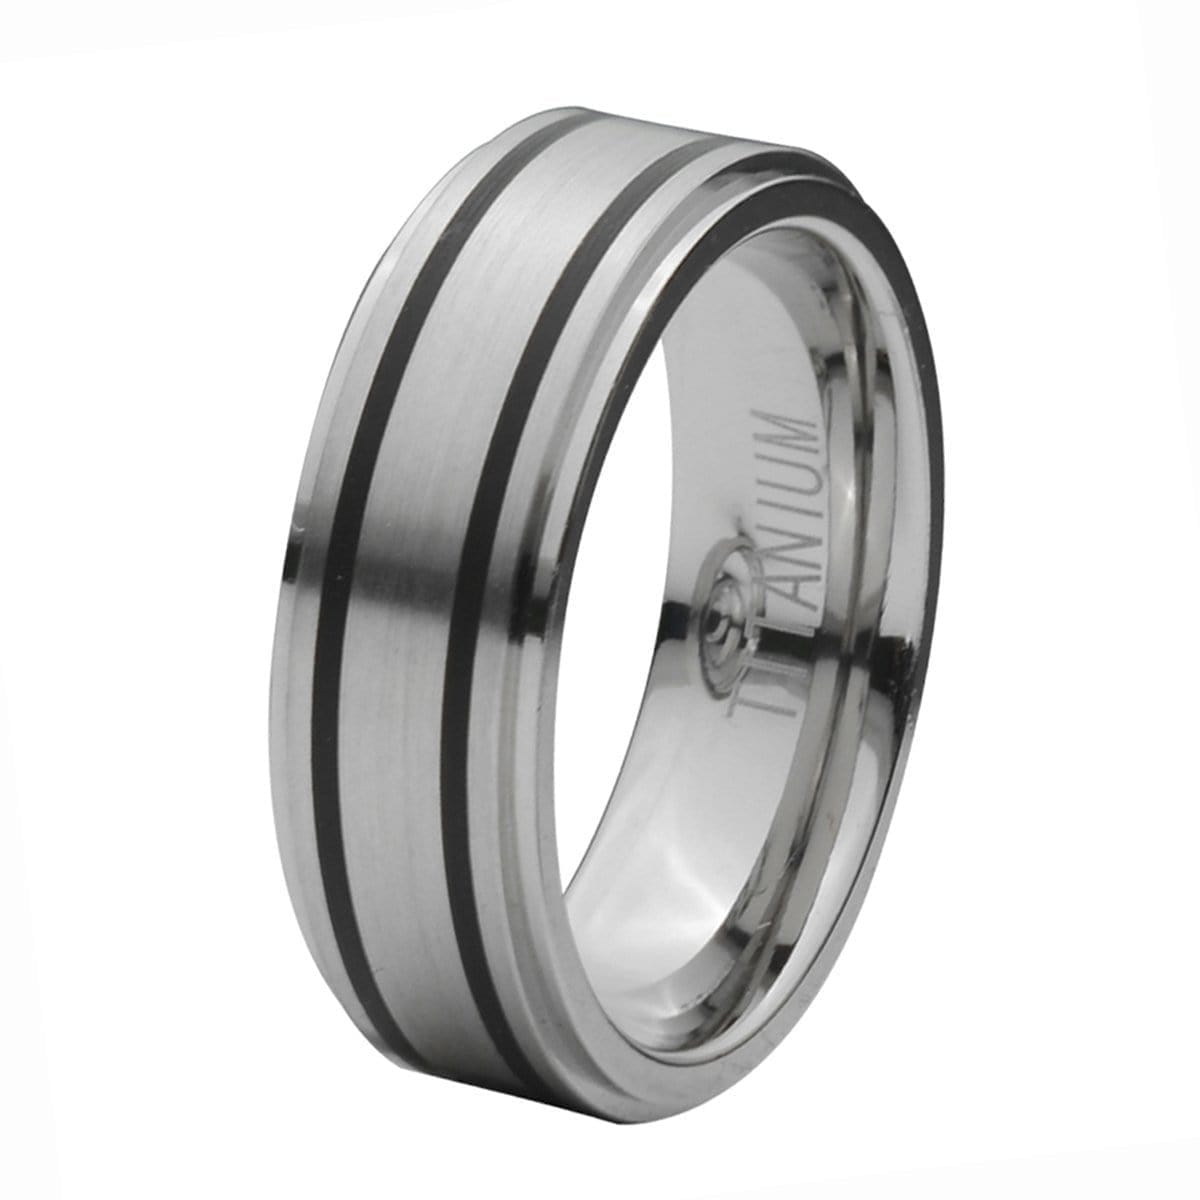 INOX JEWELRY Rings Silver Tone Titanium with Inlaid Black Rubber Band Ring